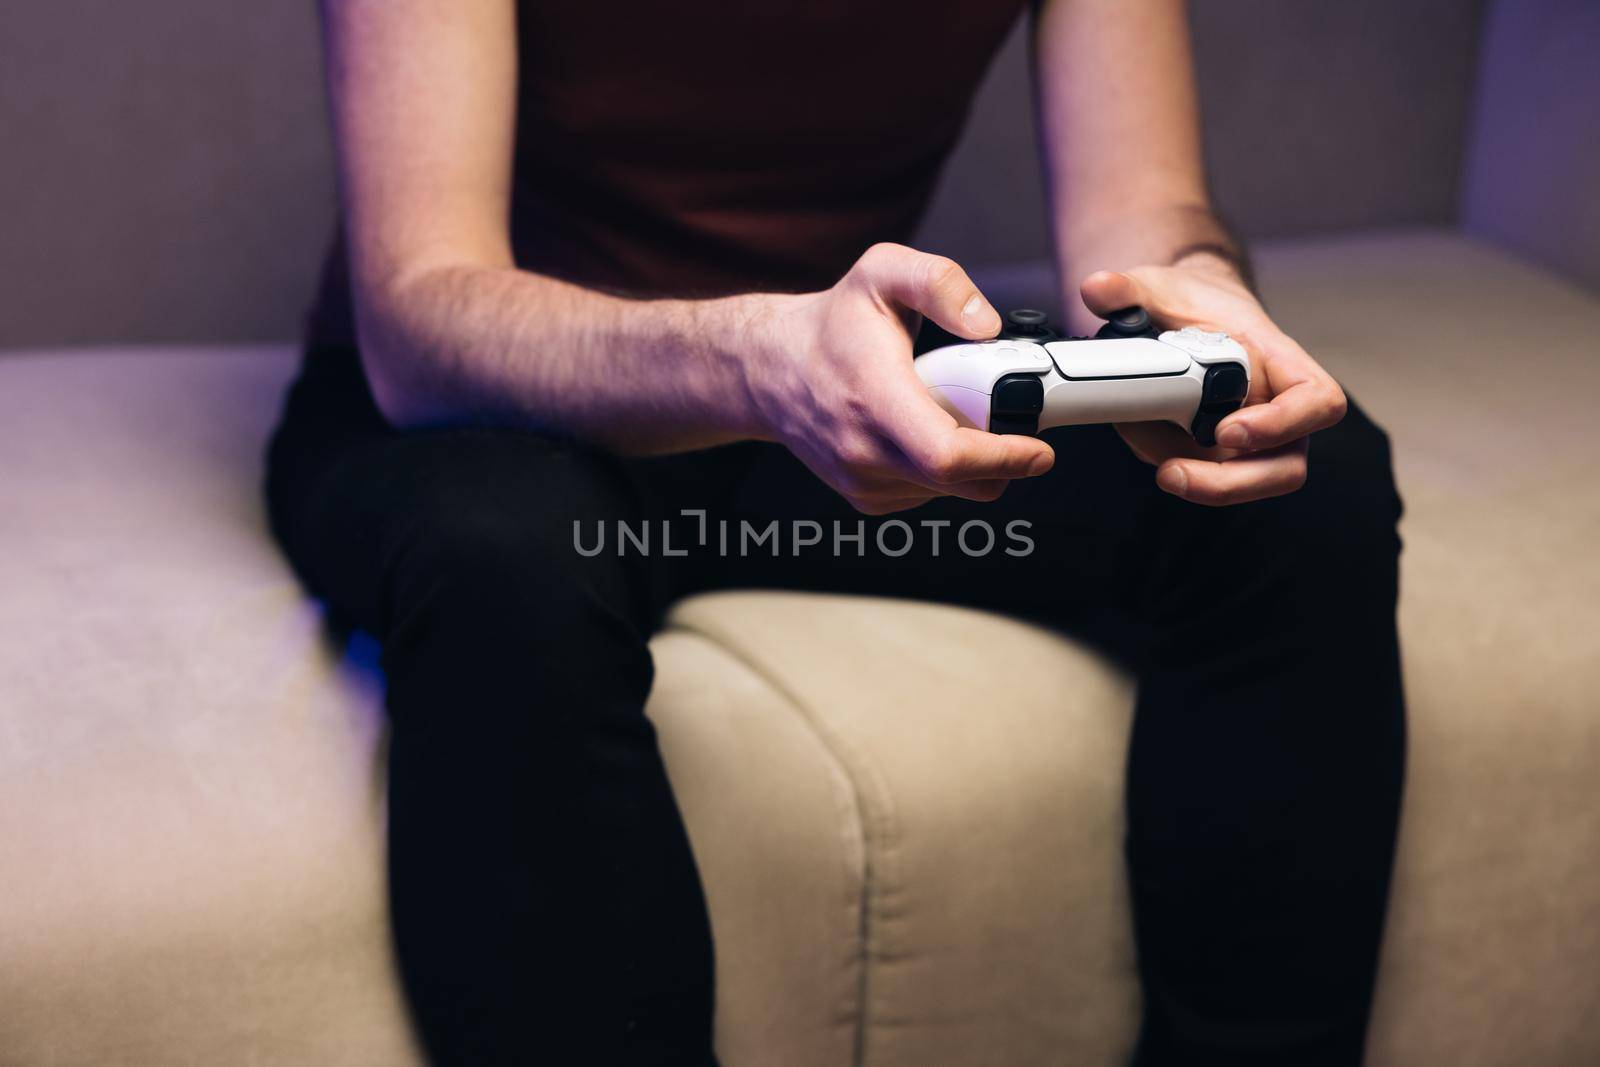 Close-up of the man holding a white joystick next gen console and playing a video game on TV. Males hands holding joystick, playing video game and having fun.